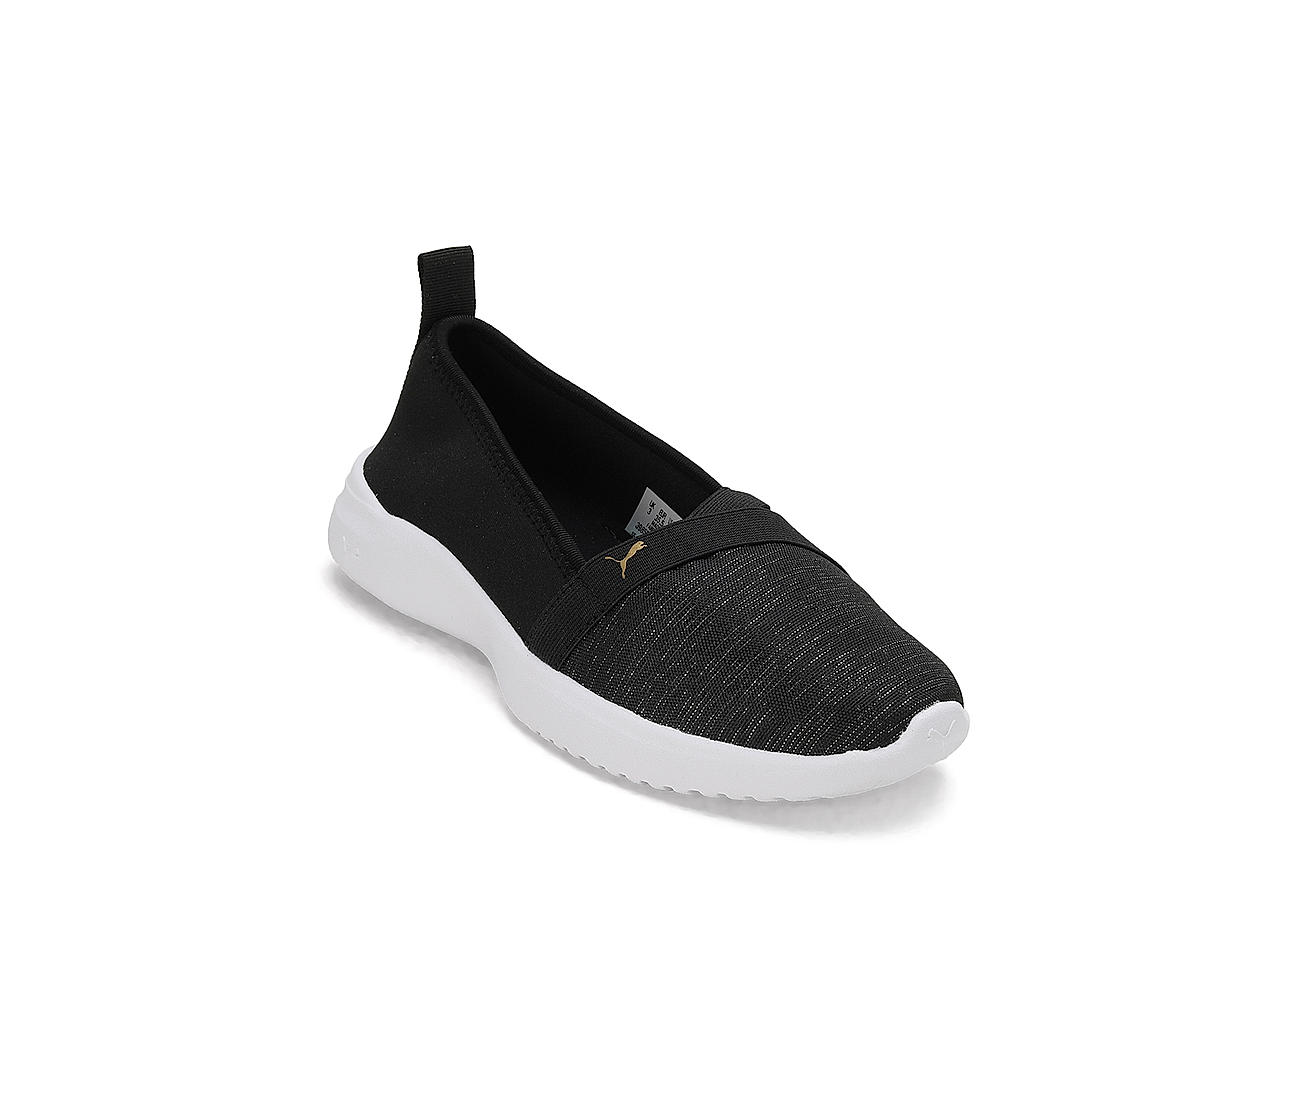 Roadster Slip On Shoes - Buy Roadster Slip On Shoes online in India